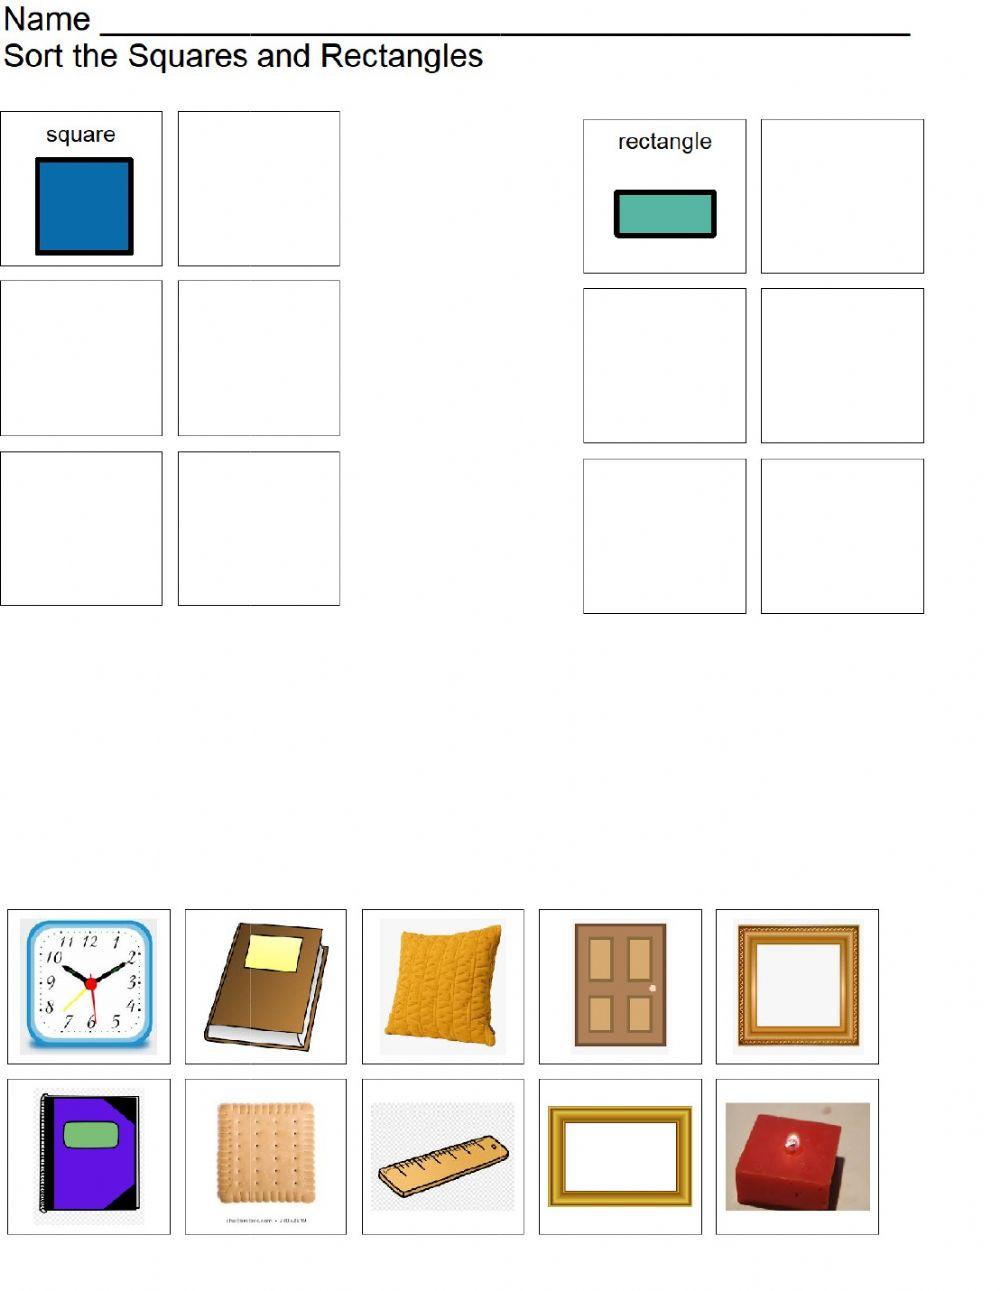 Square and rectangle sort